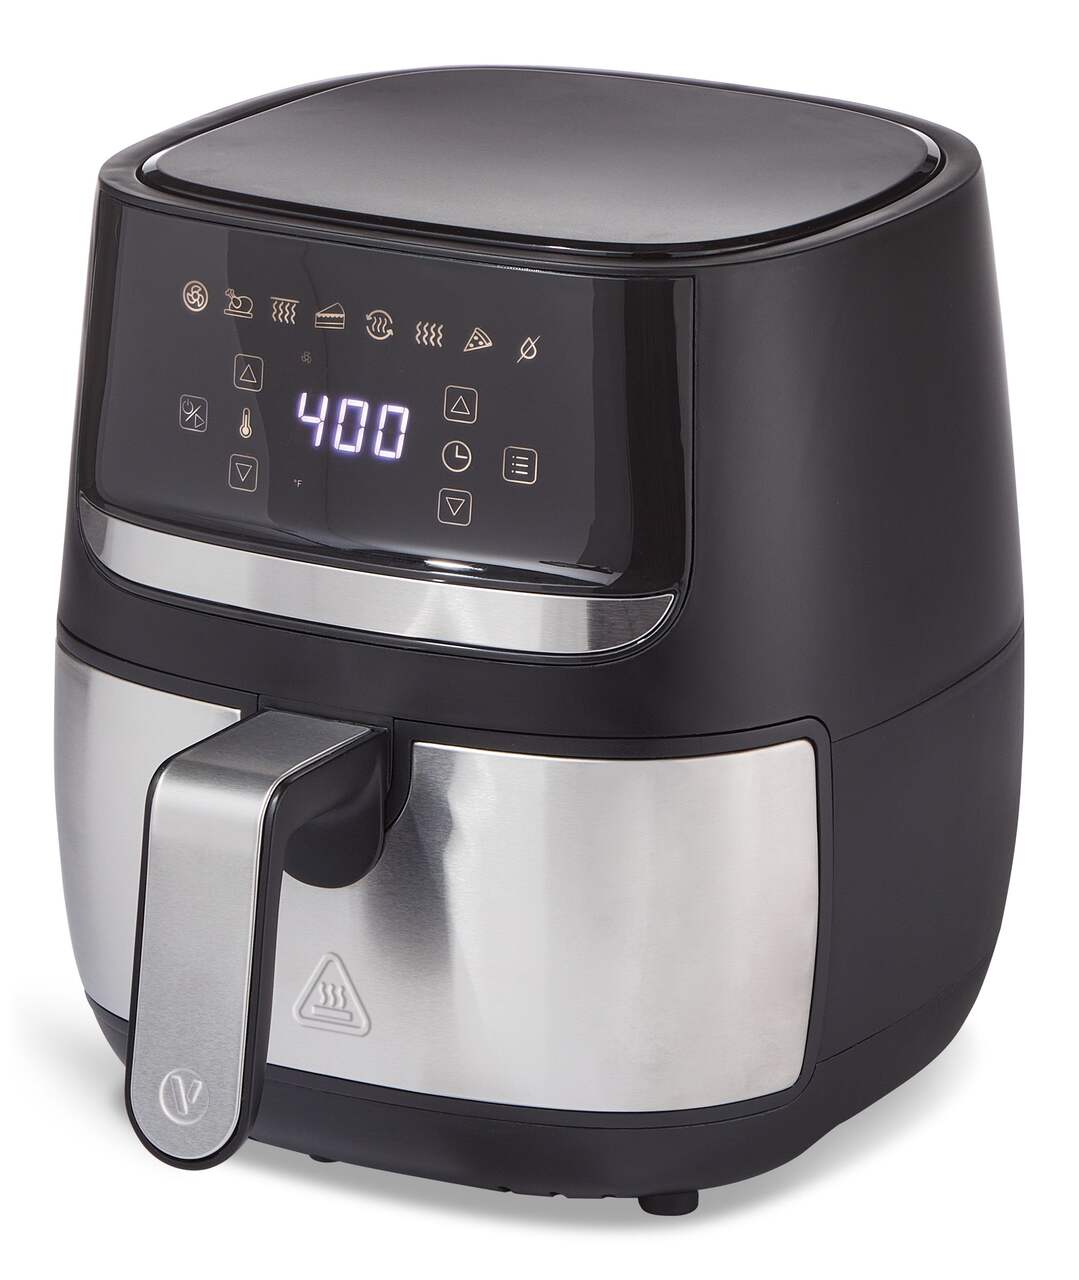 https://media-www.canadiantire.ca/product/living/kitchen/kitchen-appliances/0430189/vida-by-paderno-stainless-steel-3-8l-air-fryer-d31b4a2f-469a-4746-8b05-2262e499a6b3-jpgrendition.jpg?imdensity=1&imwidth=640&impolicy=mZoom